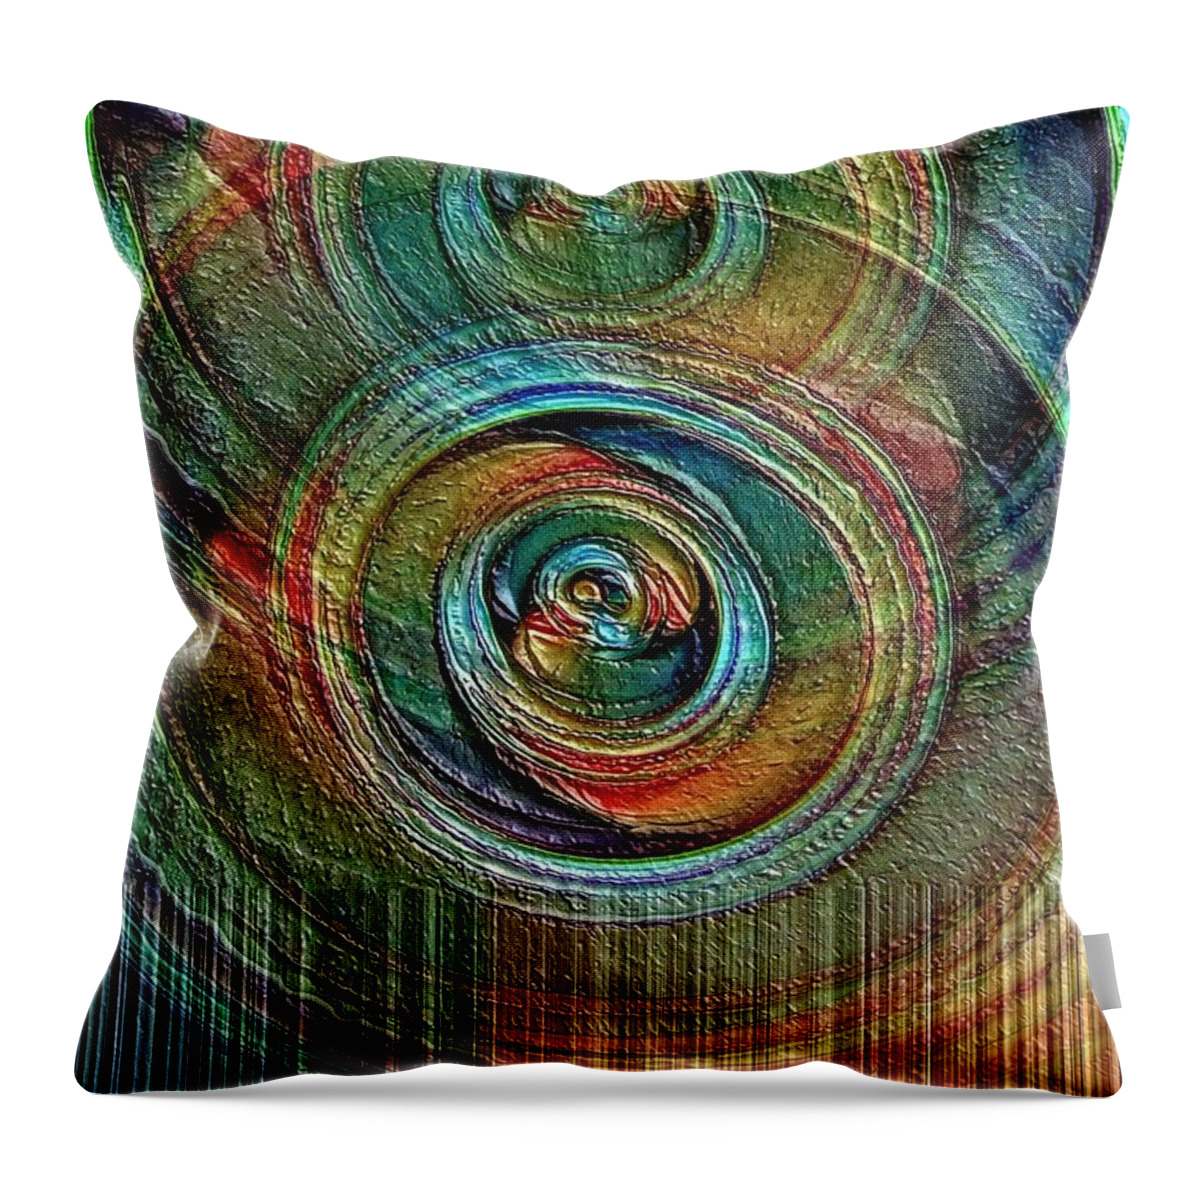 Oil Throw Pillow featuring the digital art Oil and Water by David Manlove